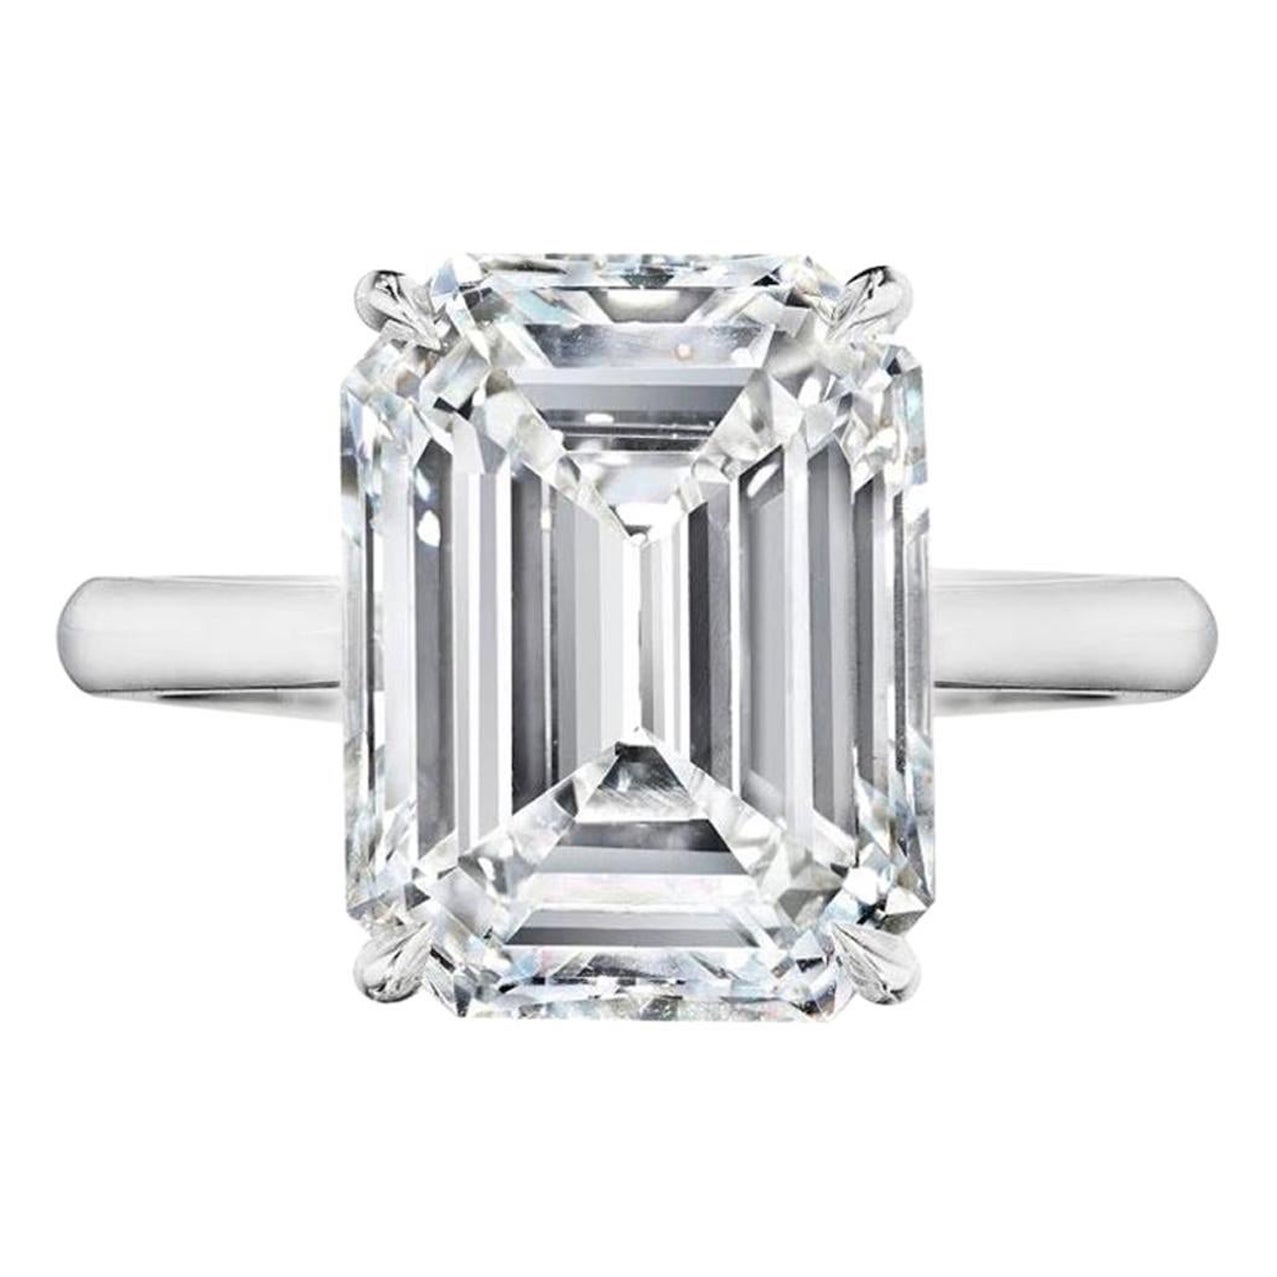 GIA Certified 5.73 Carat Emerald Cut Diamond Engagement Ring For Sale